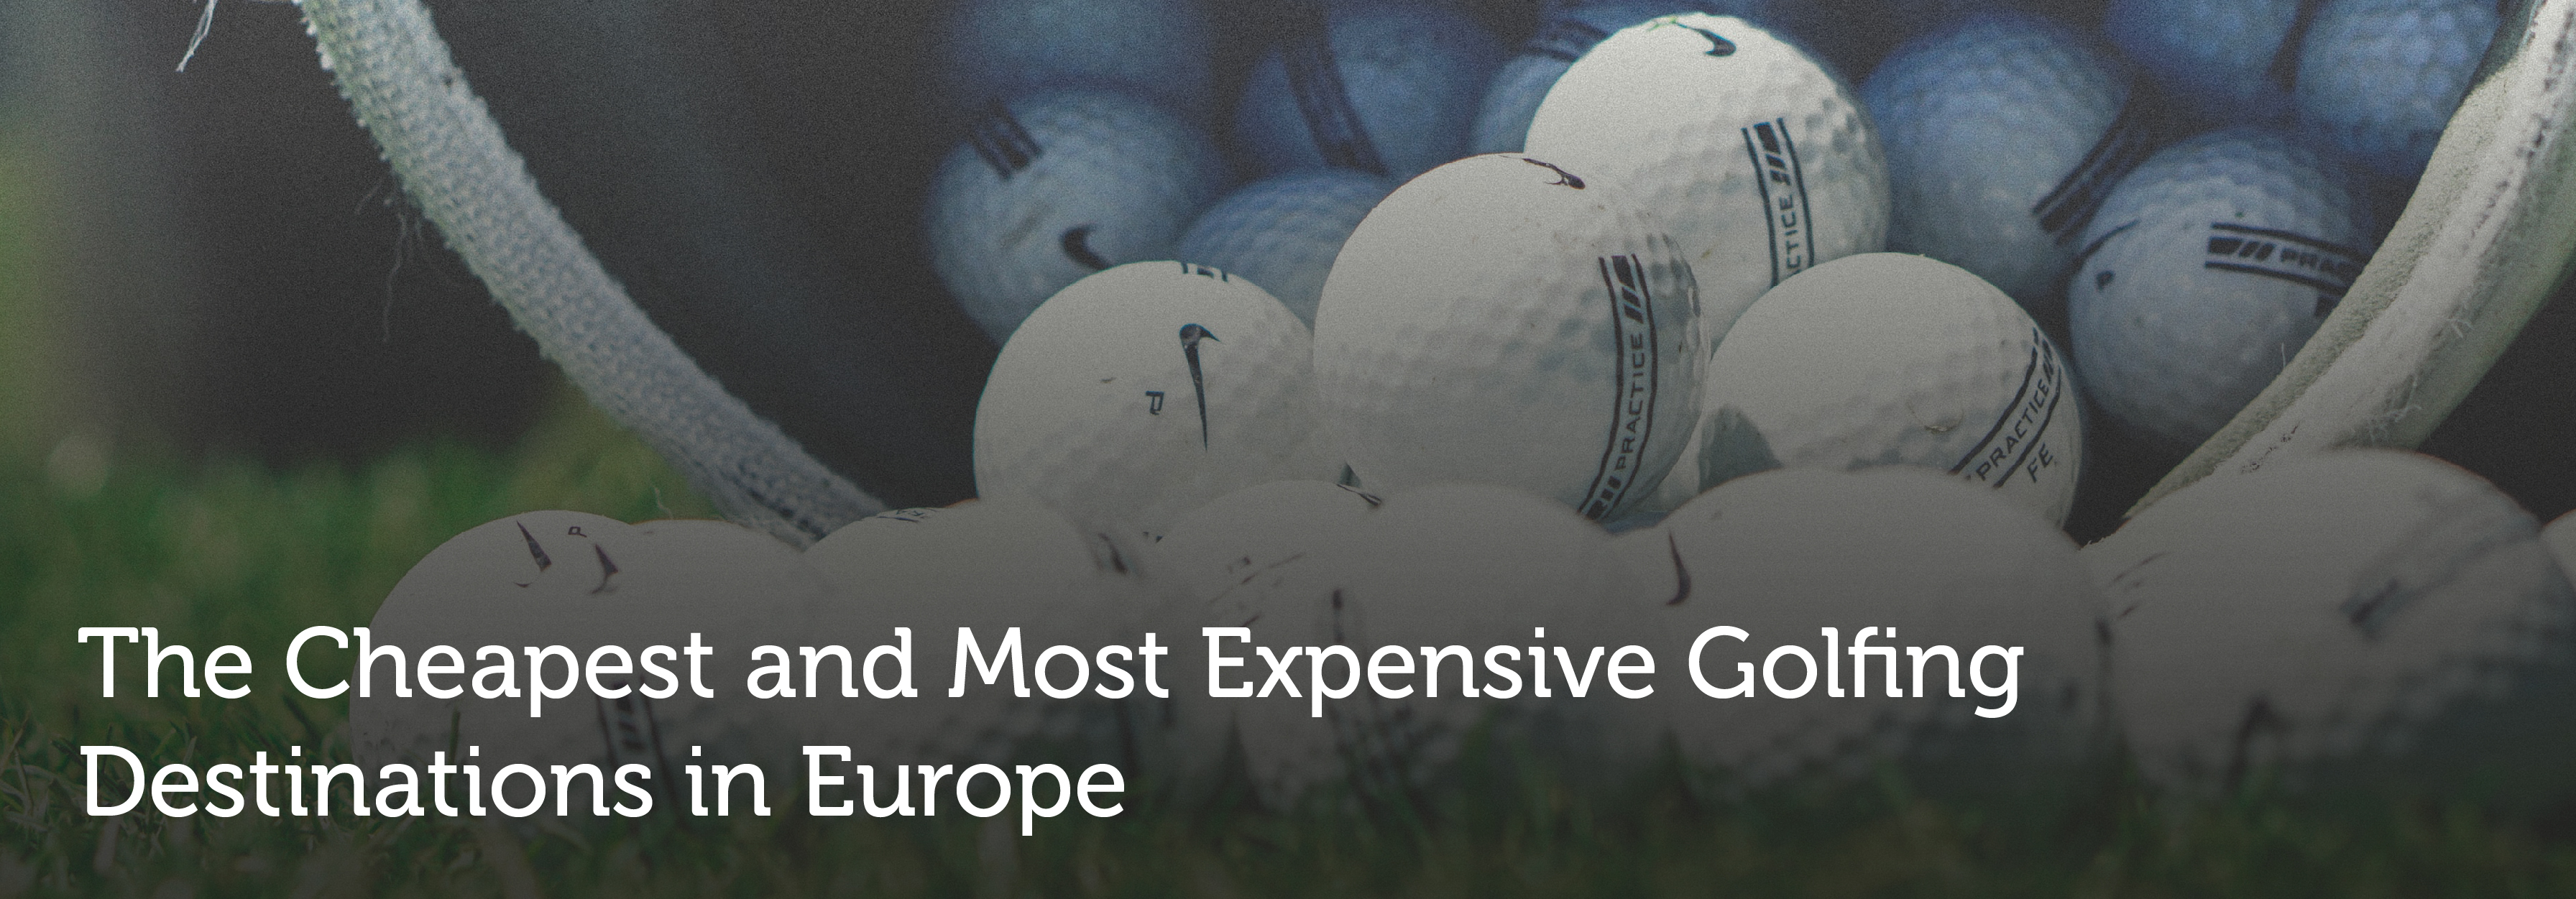 The Cheapest and Most Expensive Golfing Destinations in Europe